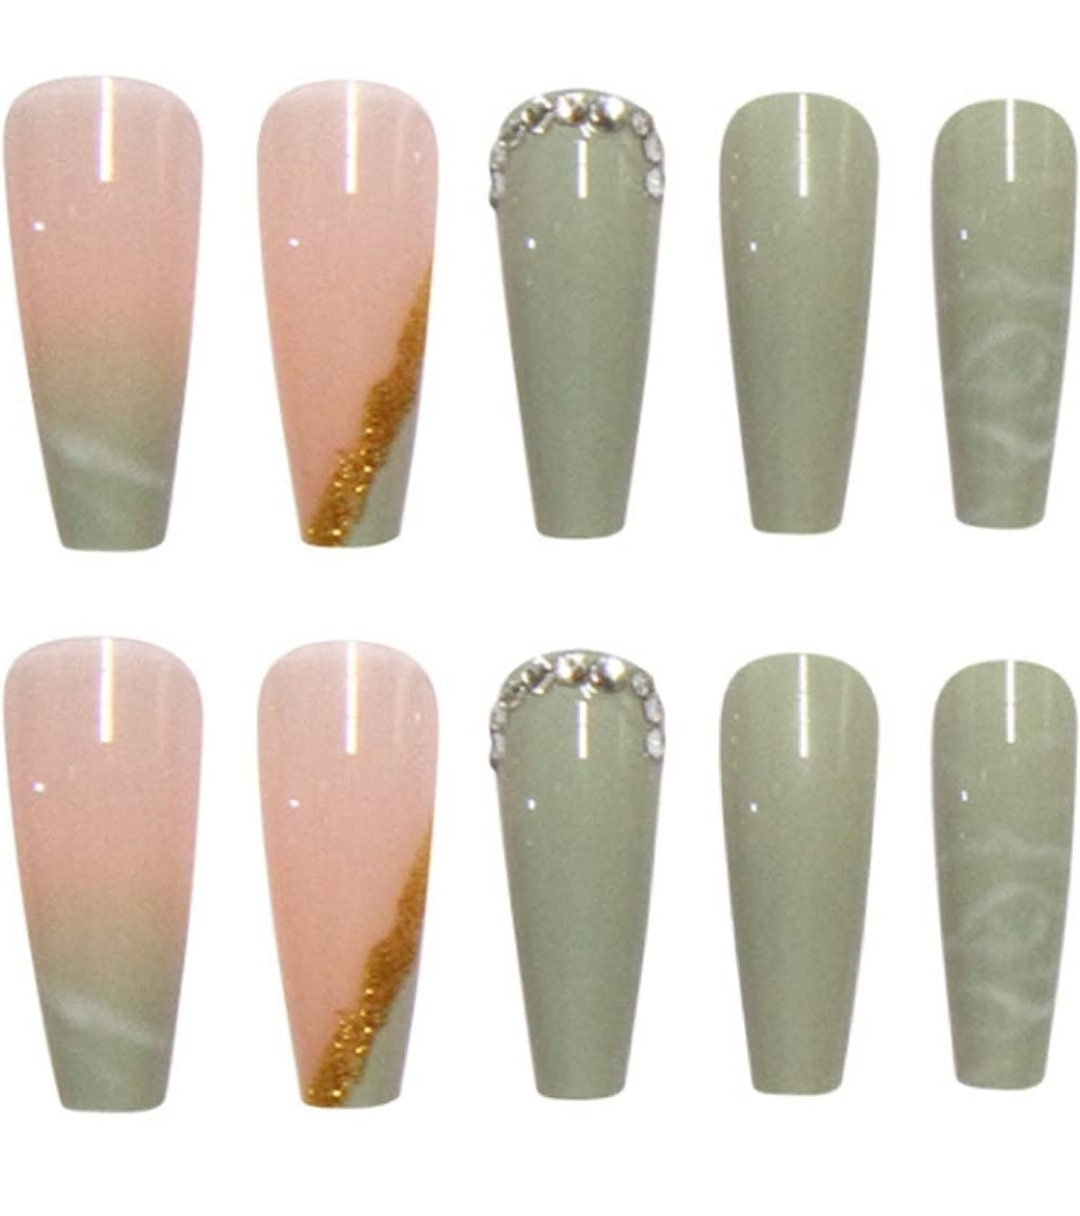 24 Green Jade Coffin Long Press on nails glue on kit Nude gold sage marble